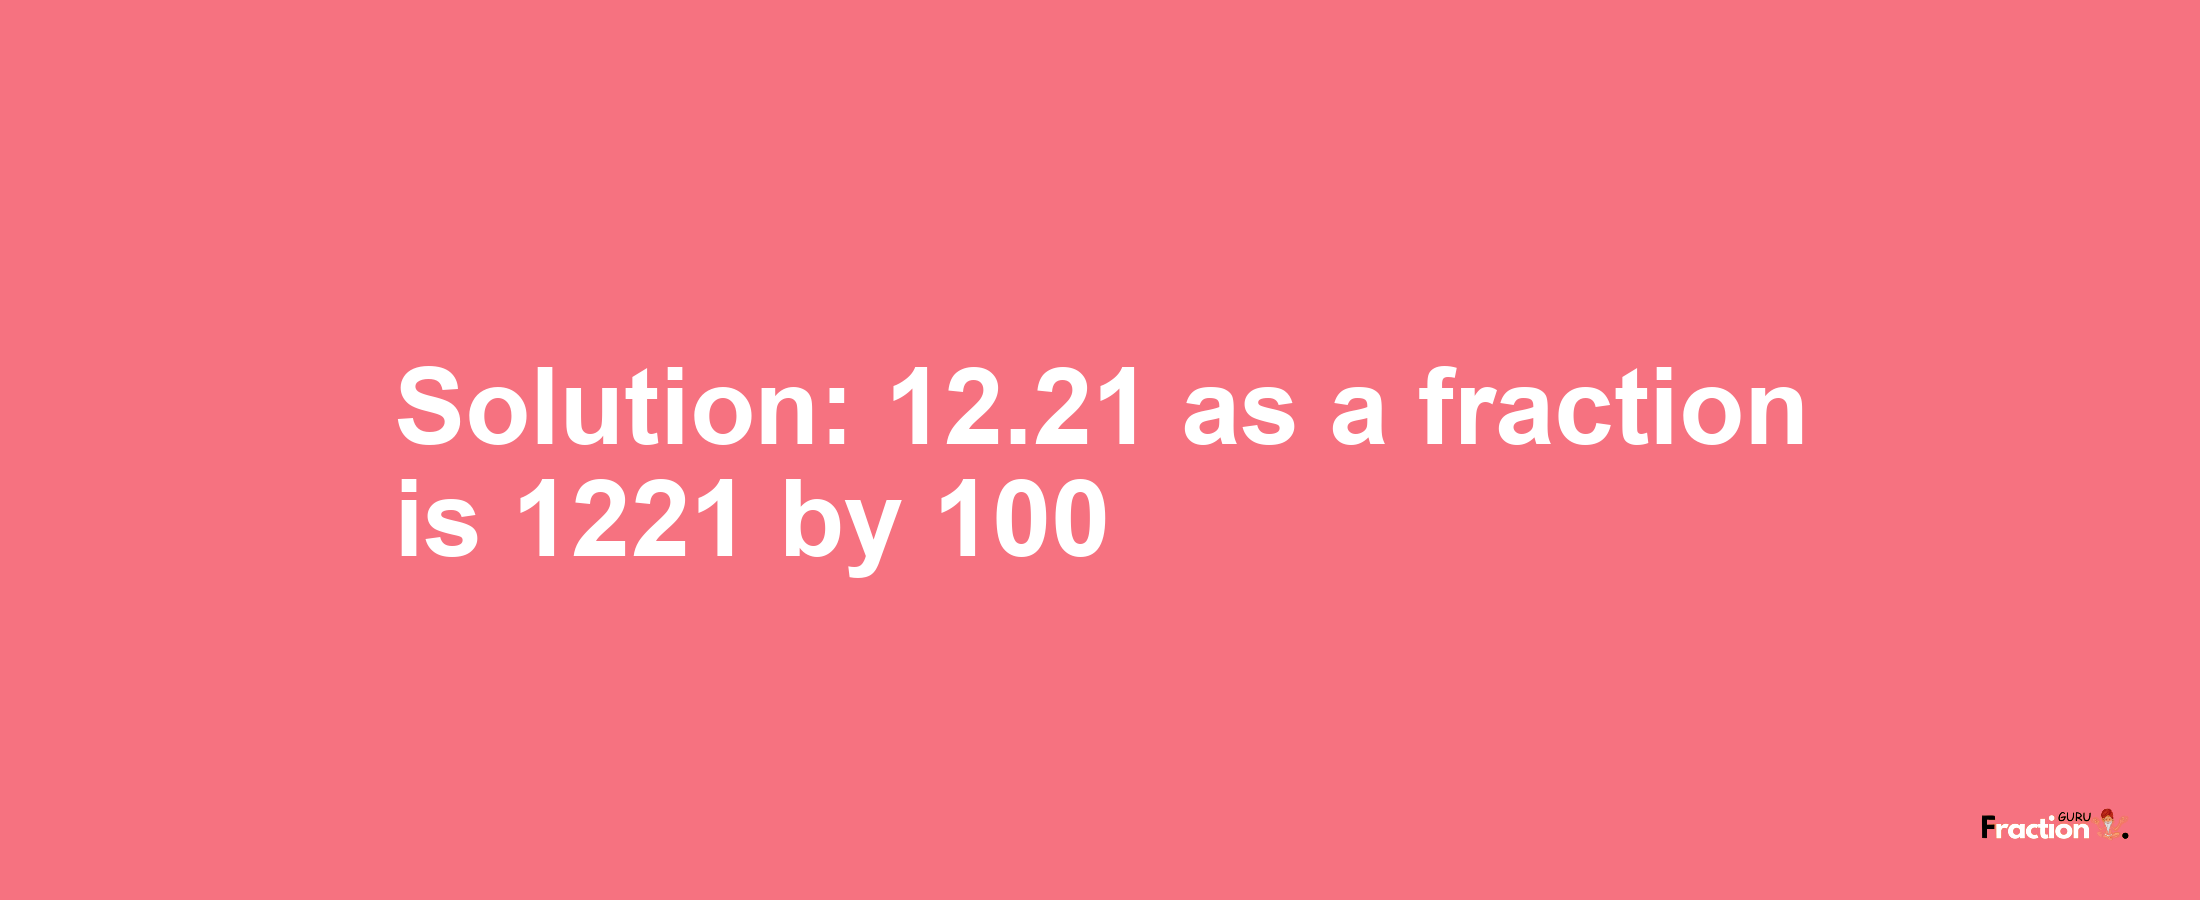 Solution:12.21 as a fraction is 1221/100